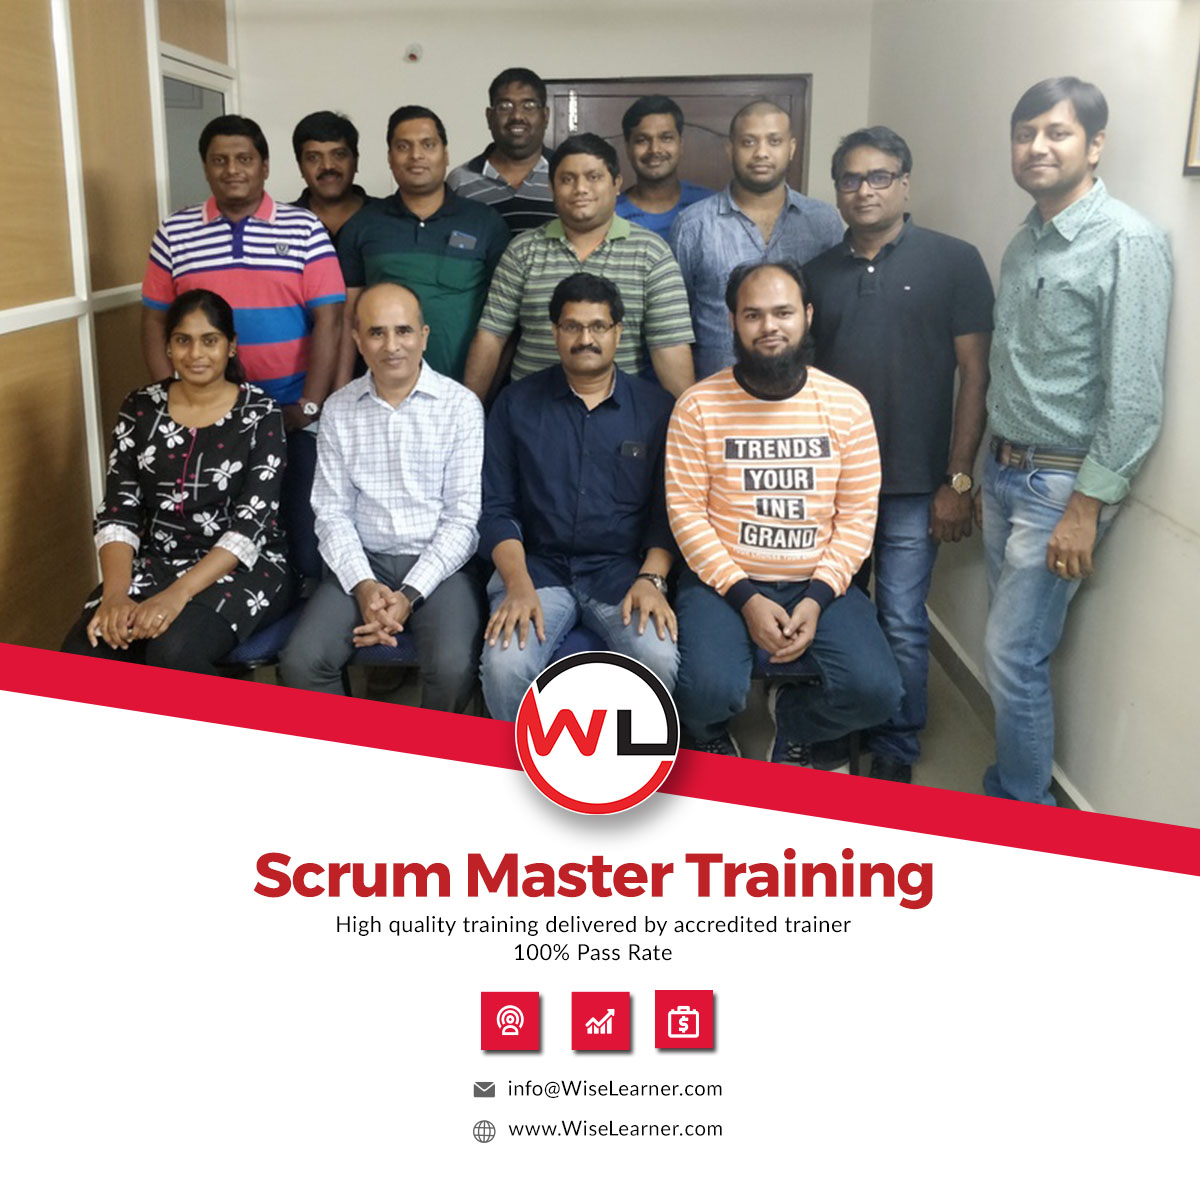 20180810014507Scrum_Master_Training_and_Certification_Program_on_10_11_March_2018.jpg